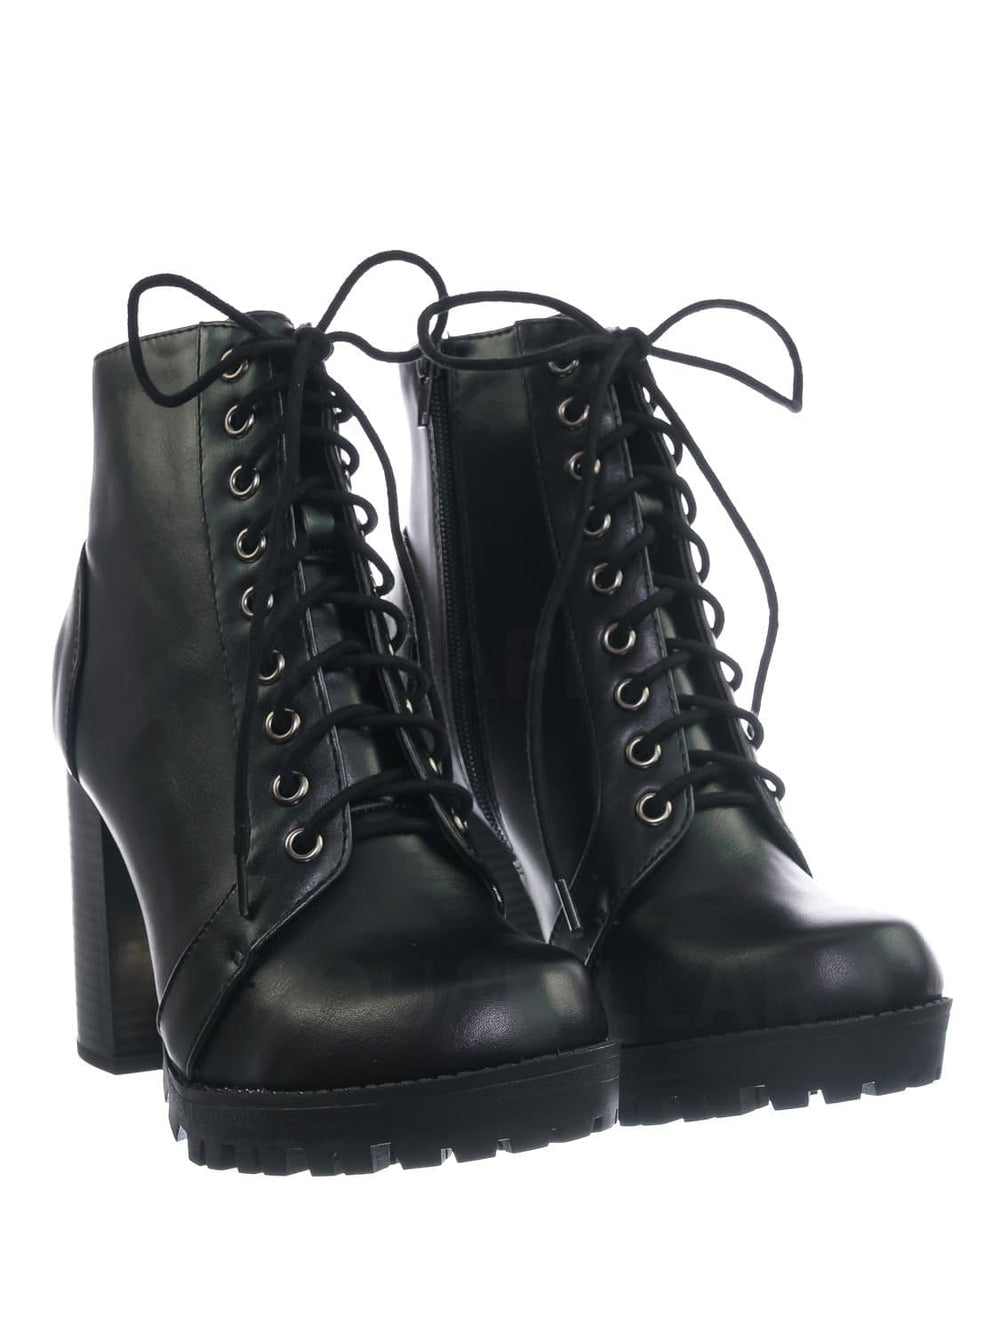 black lace up military boots